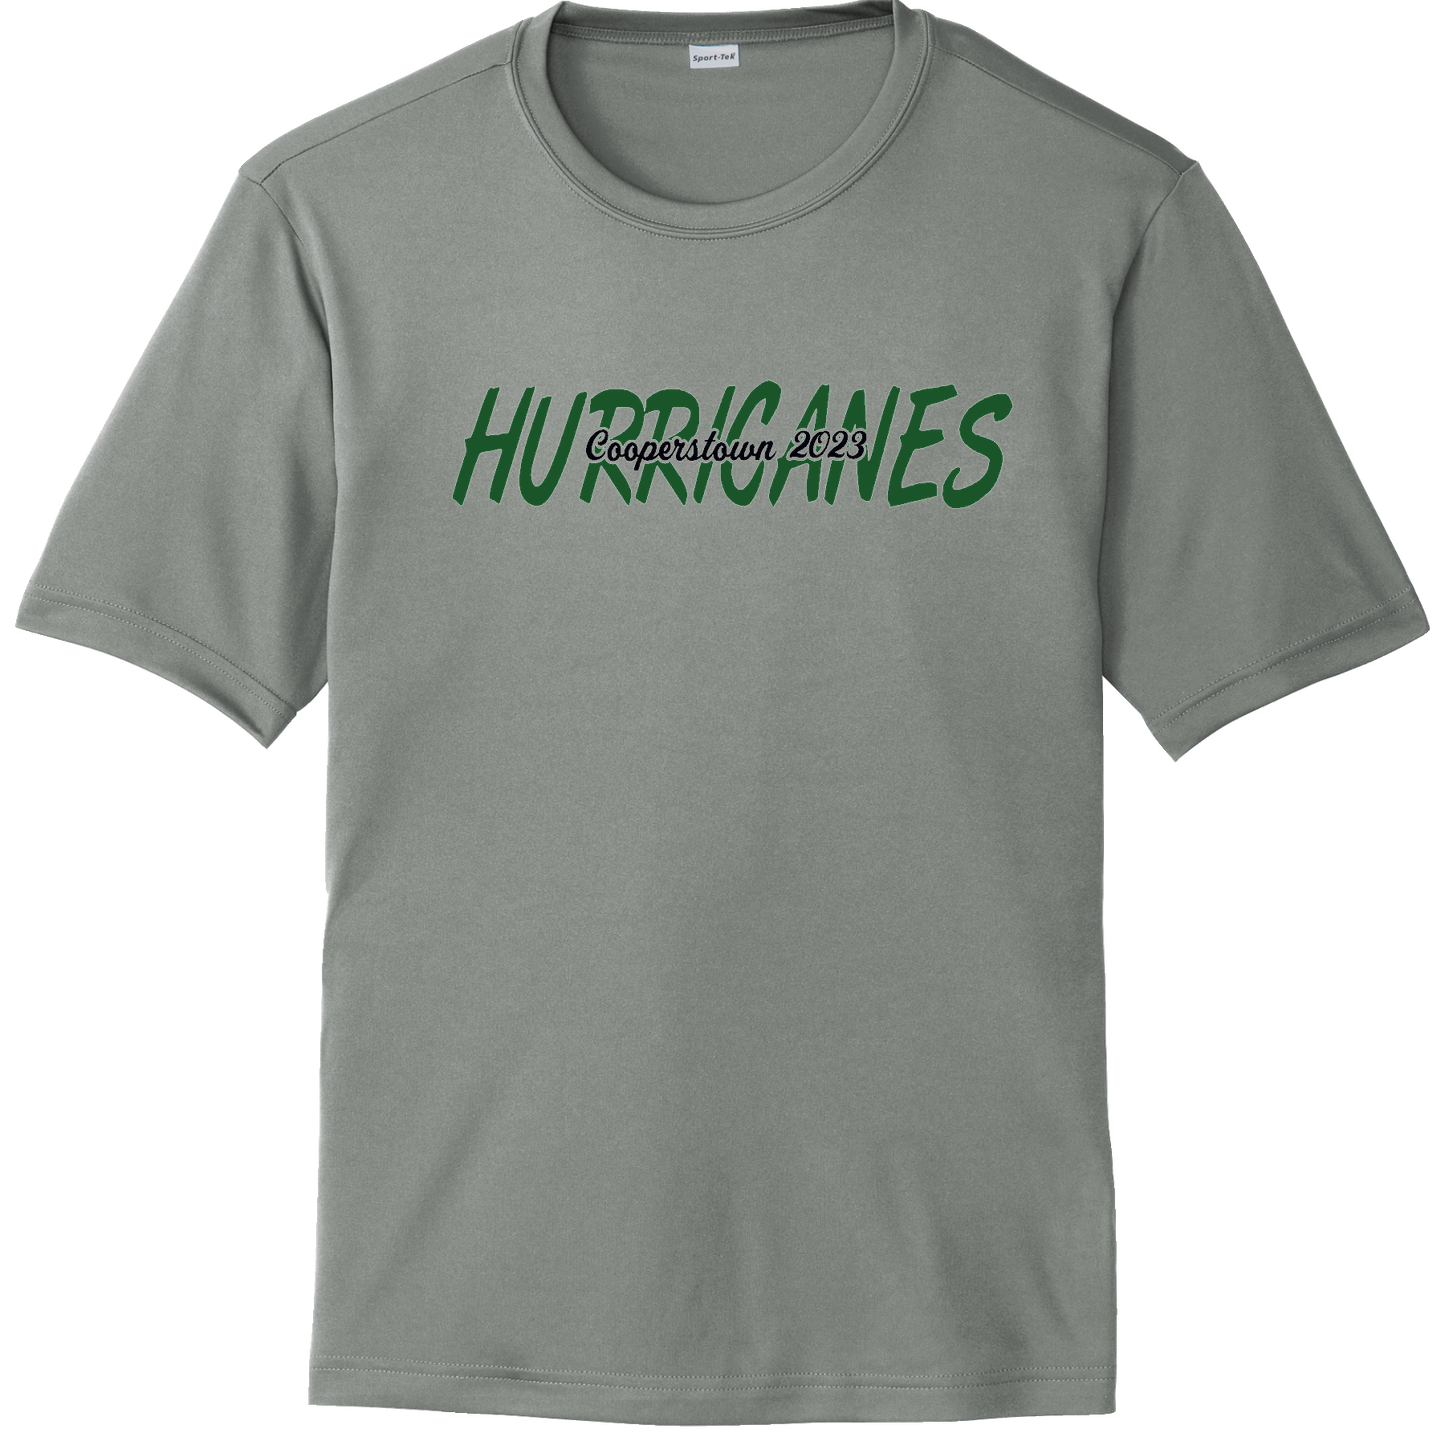 Sport-Tek Youth PosiCharge Competitor Tee HURRICANES